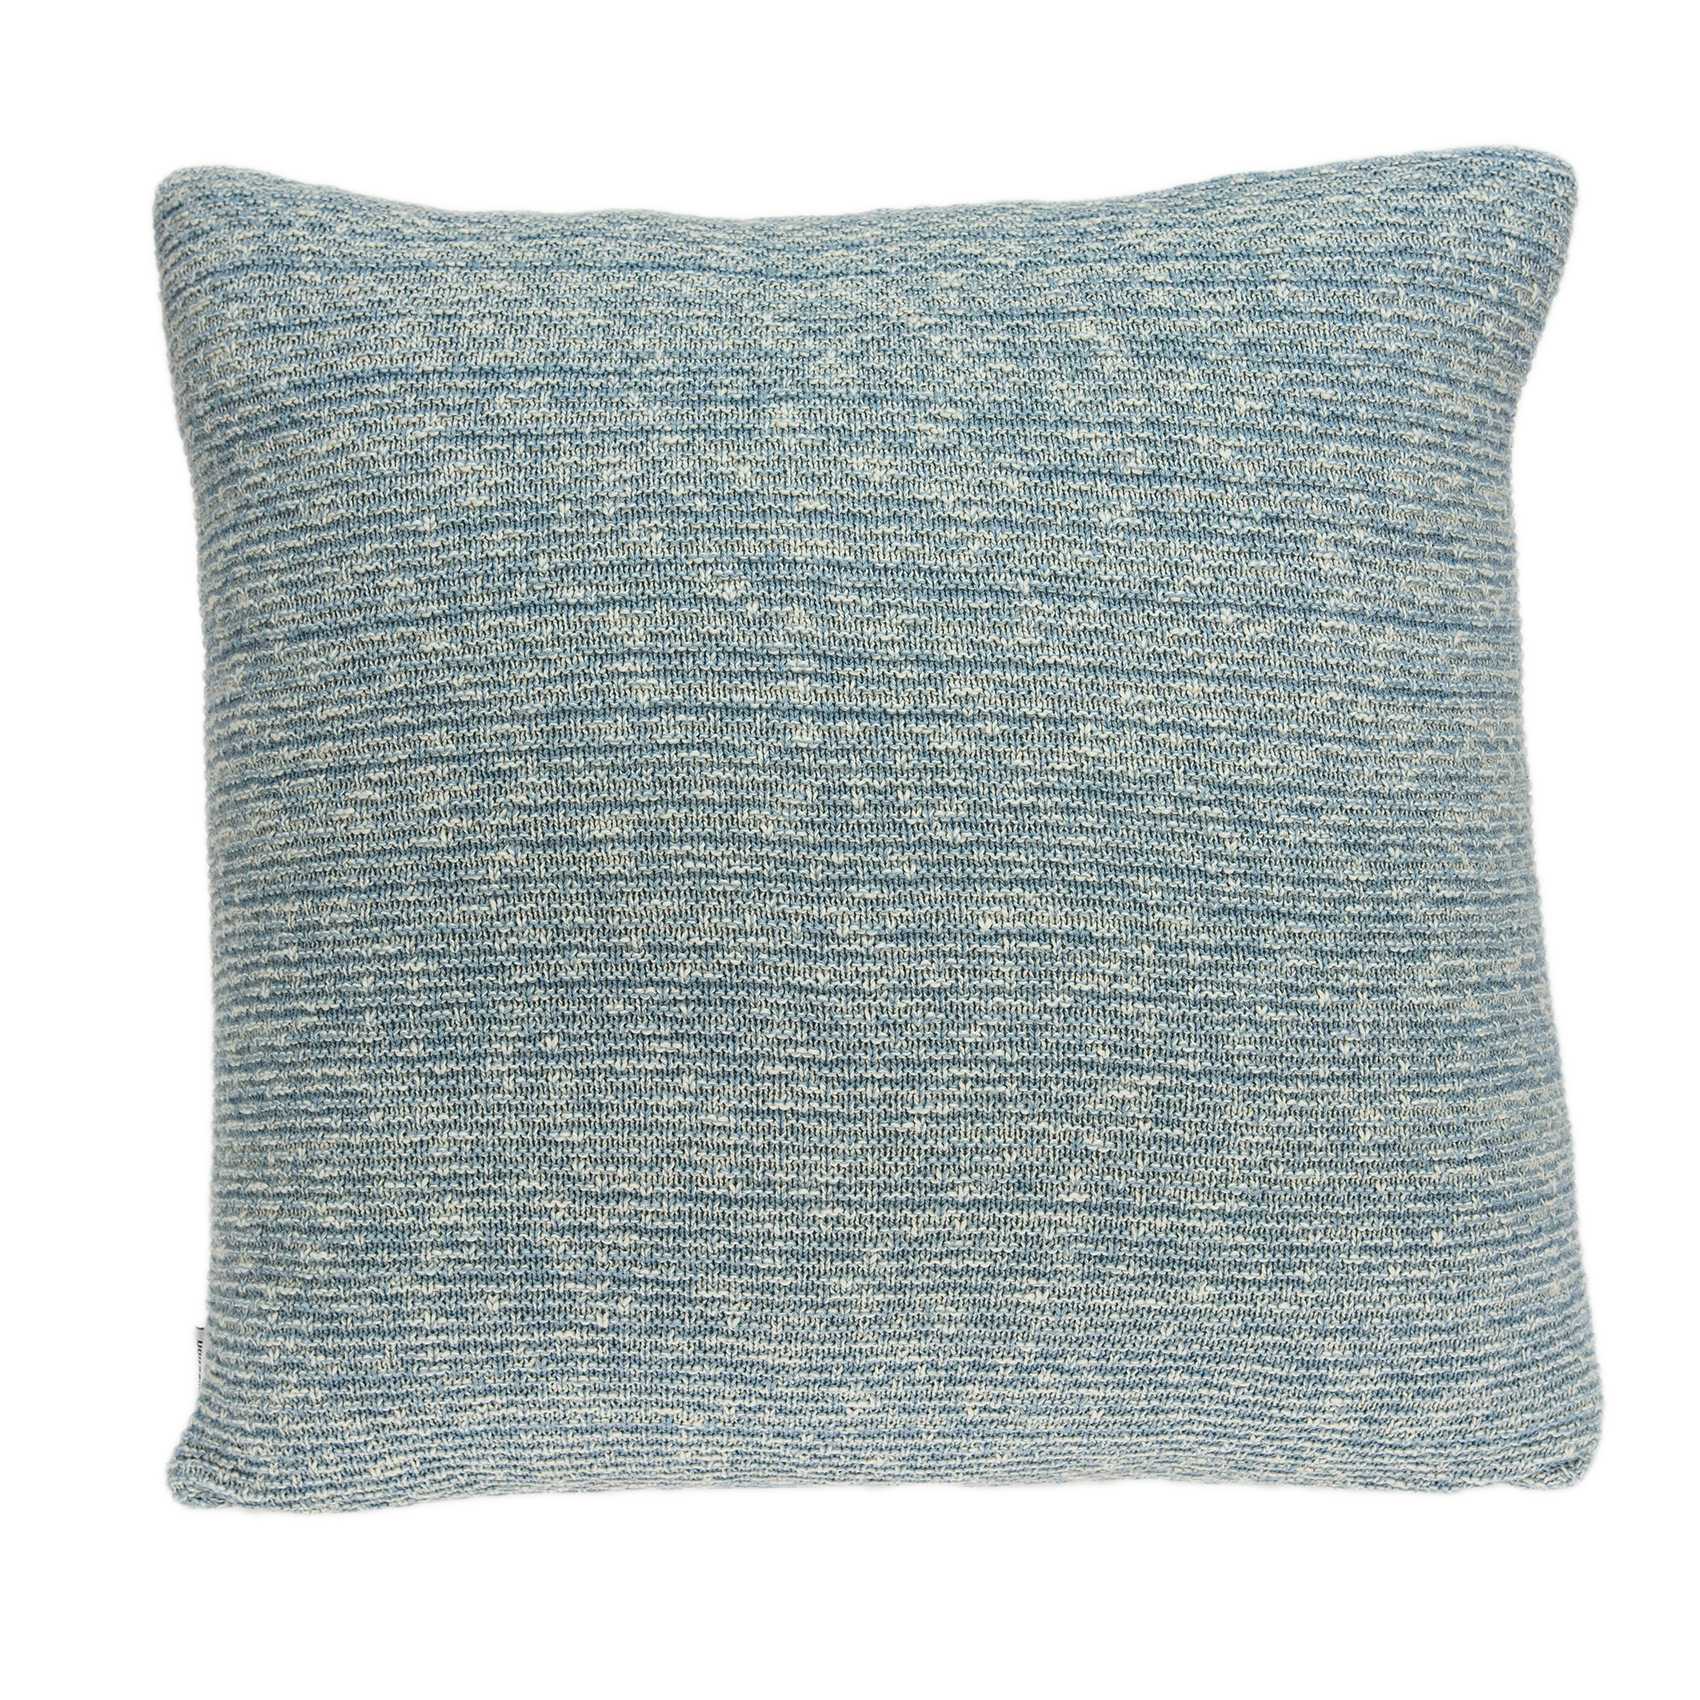 20" x 7" x 20" Transitional Blue Pillow Cover With Poly Insert